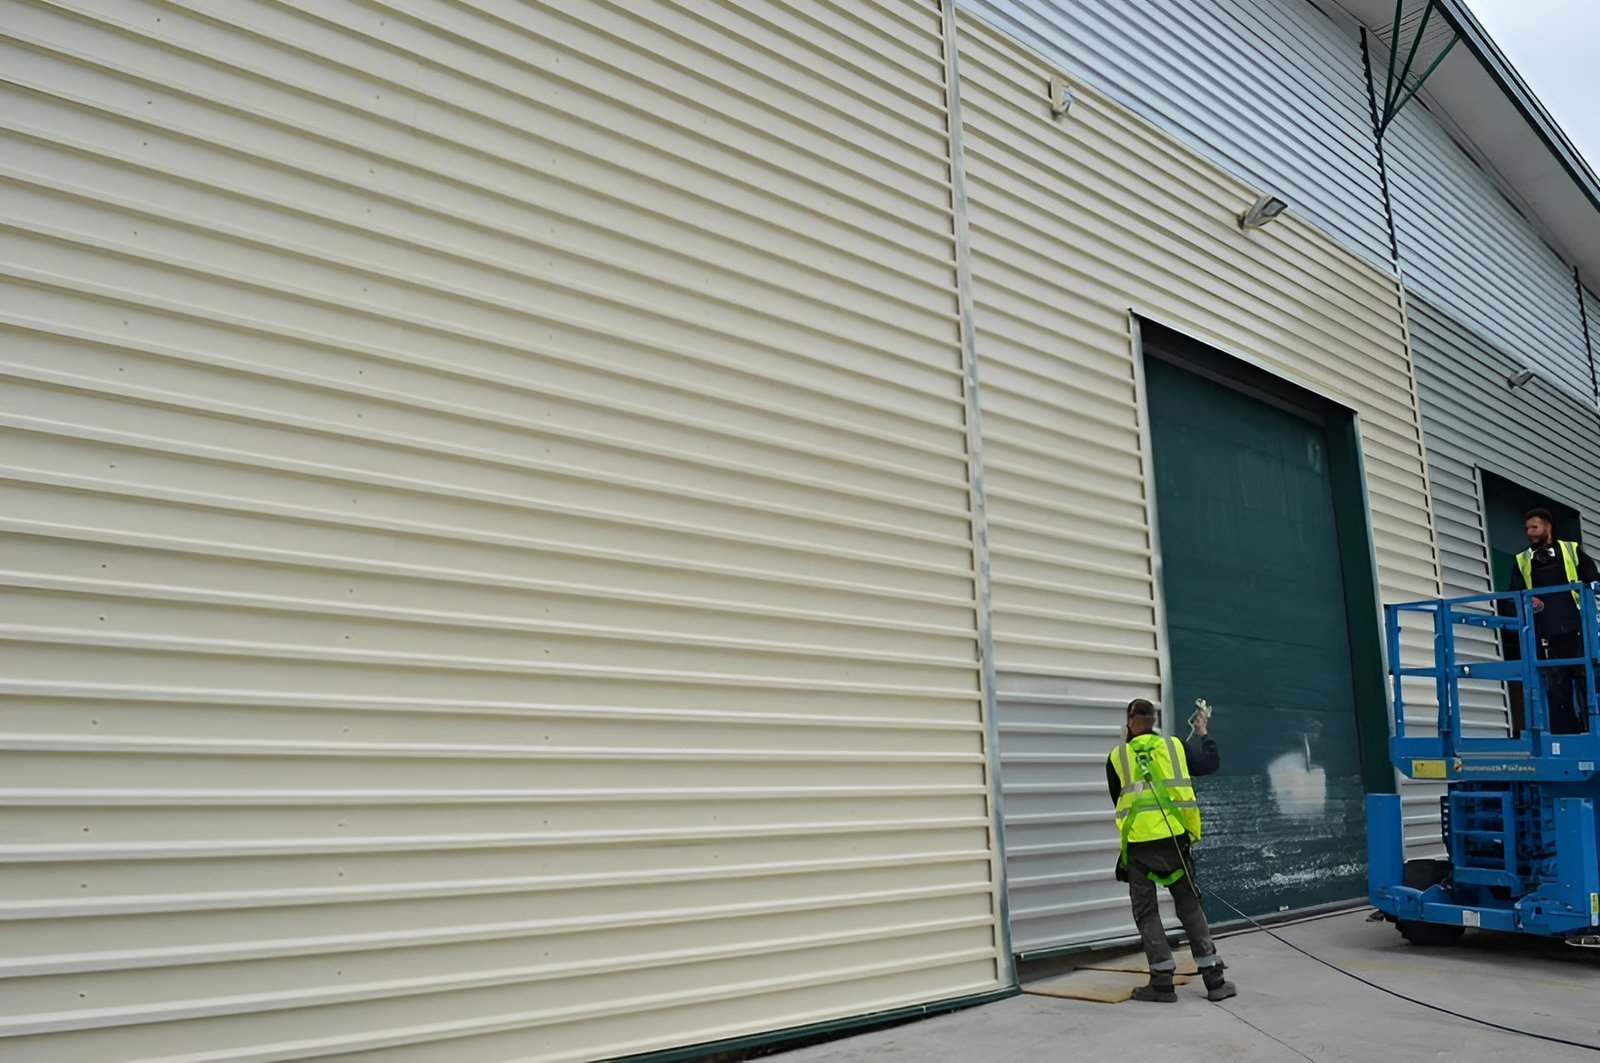 Cladding spraying on warehouse with vanilla colour